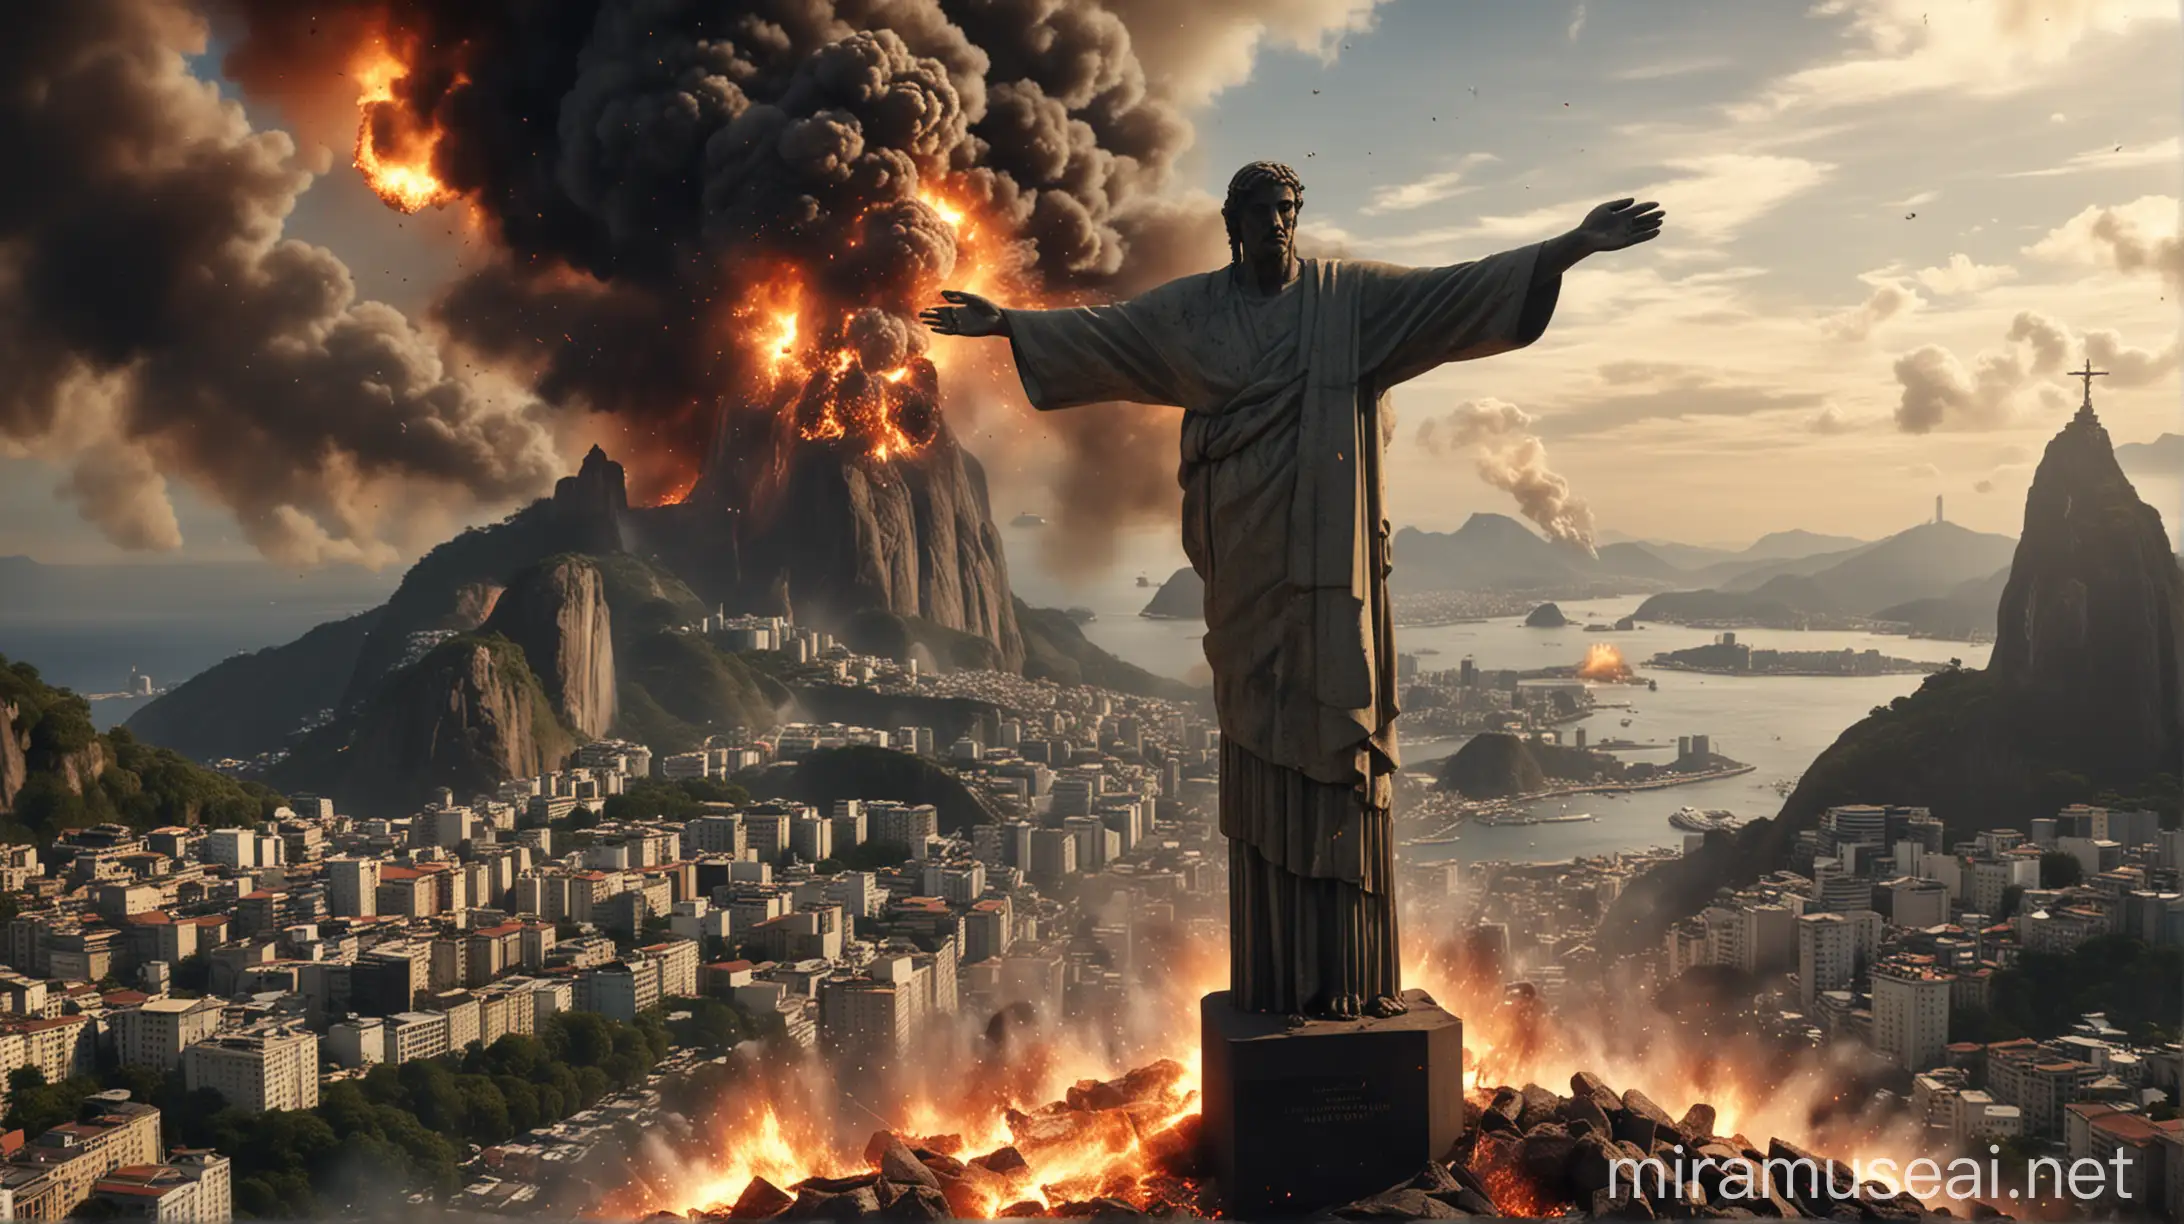 Rio de Janeiro in Flames WarTorn Cityscape with Cracked Christ the Redeemer and Explosions